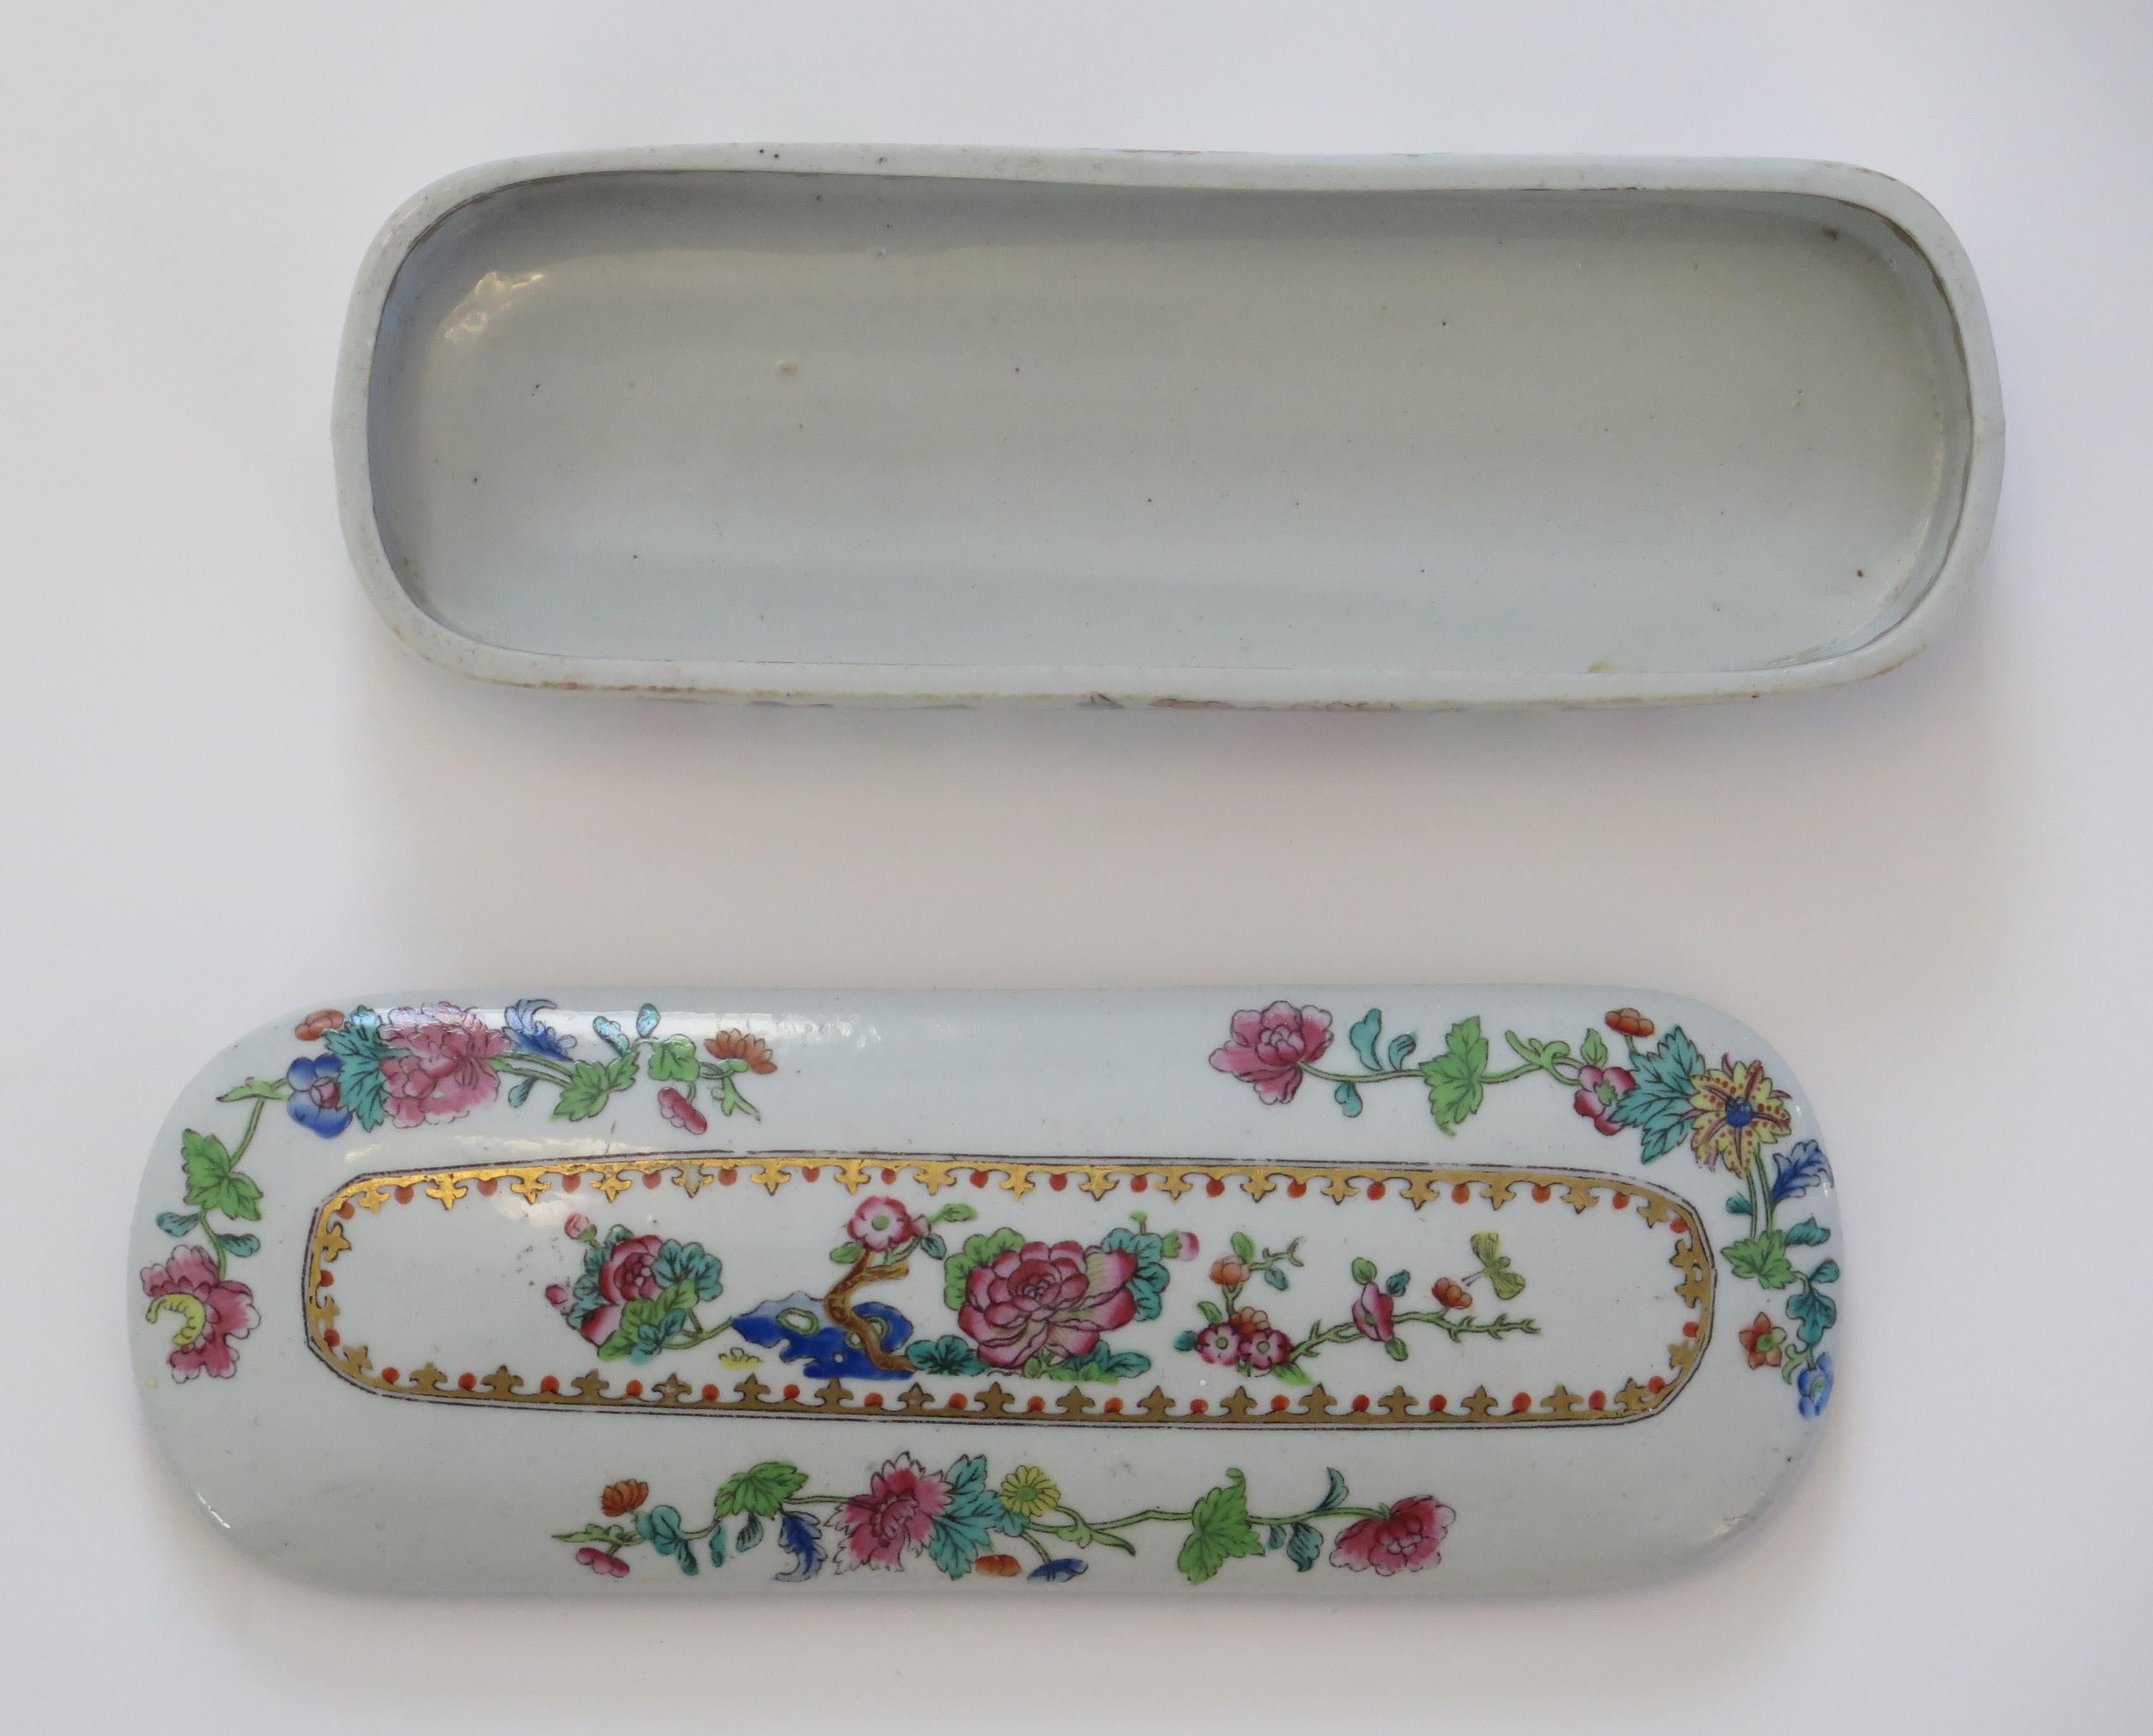 Georgian Spode Pen Tray 0r Lidded Box Ironstone Willis Pattern 2147, circa 1810 In Good Condition For Sale In Lincoln, Lincolnshire